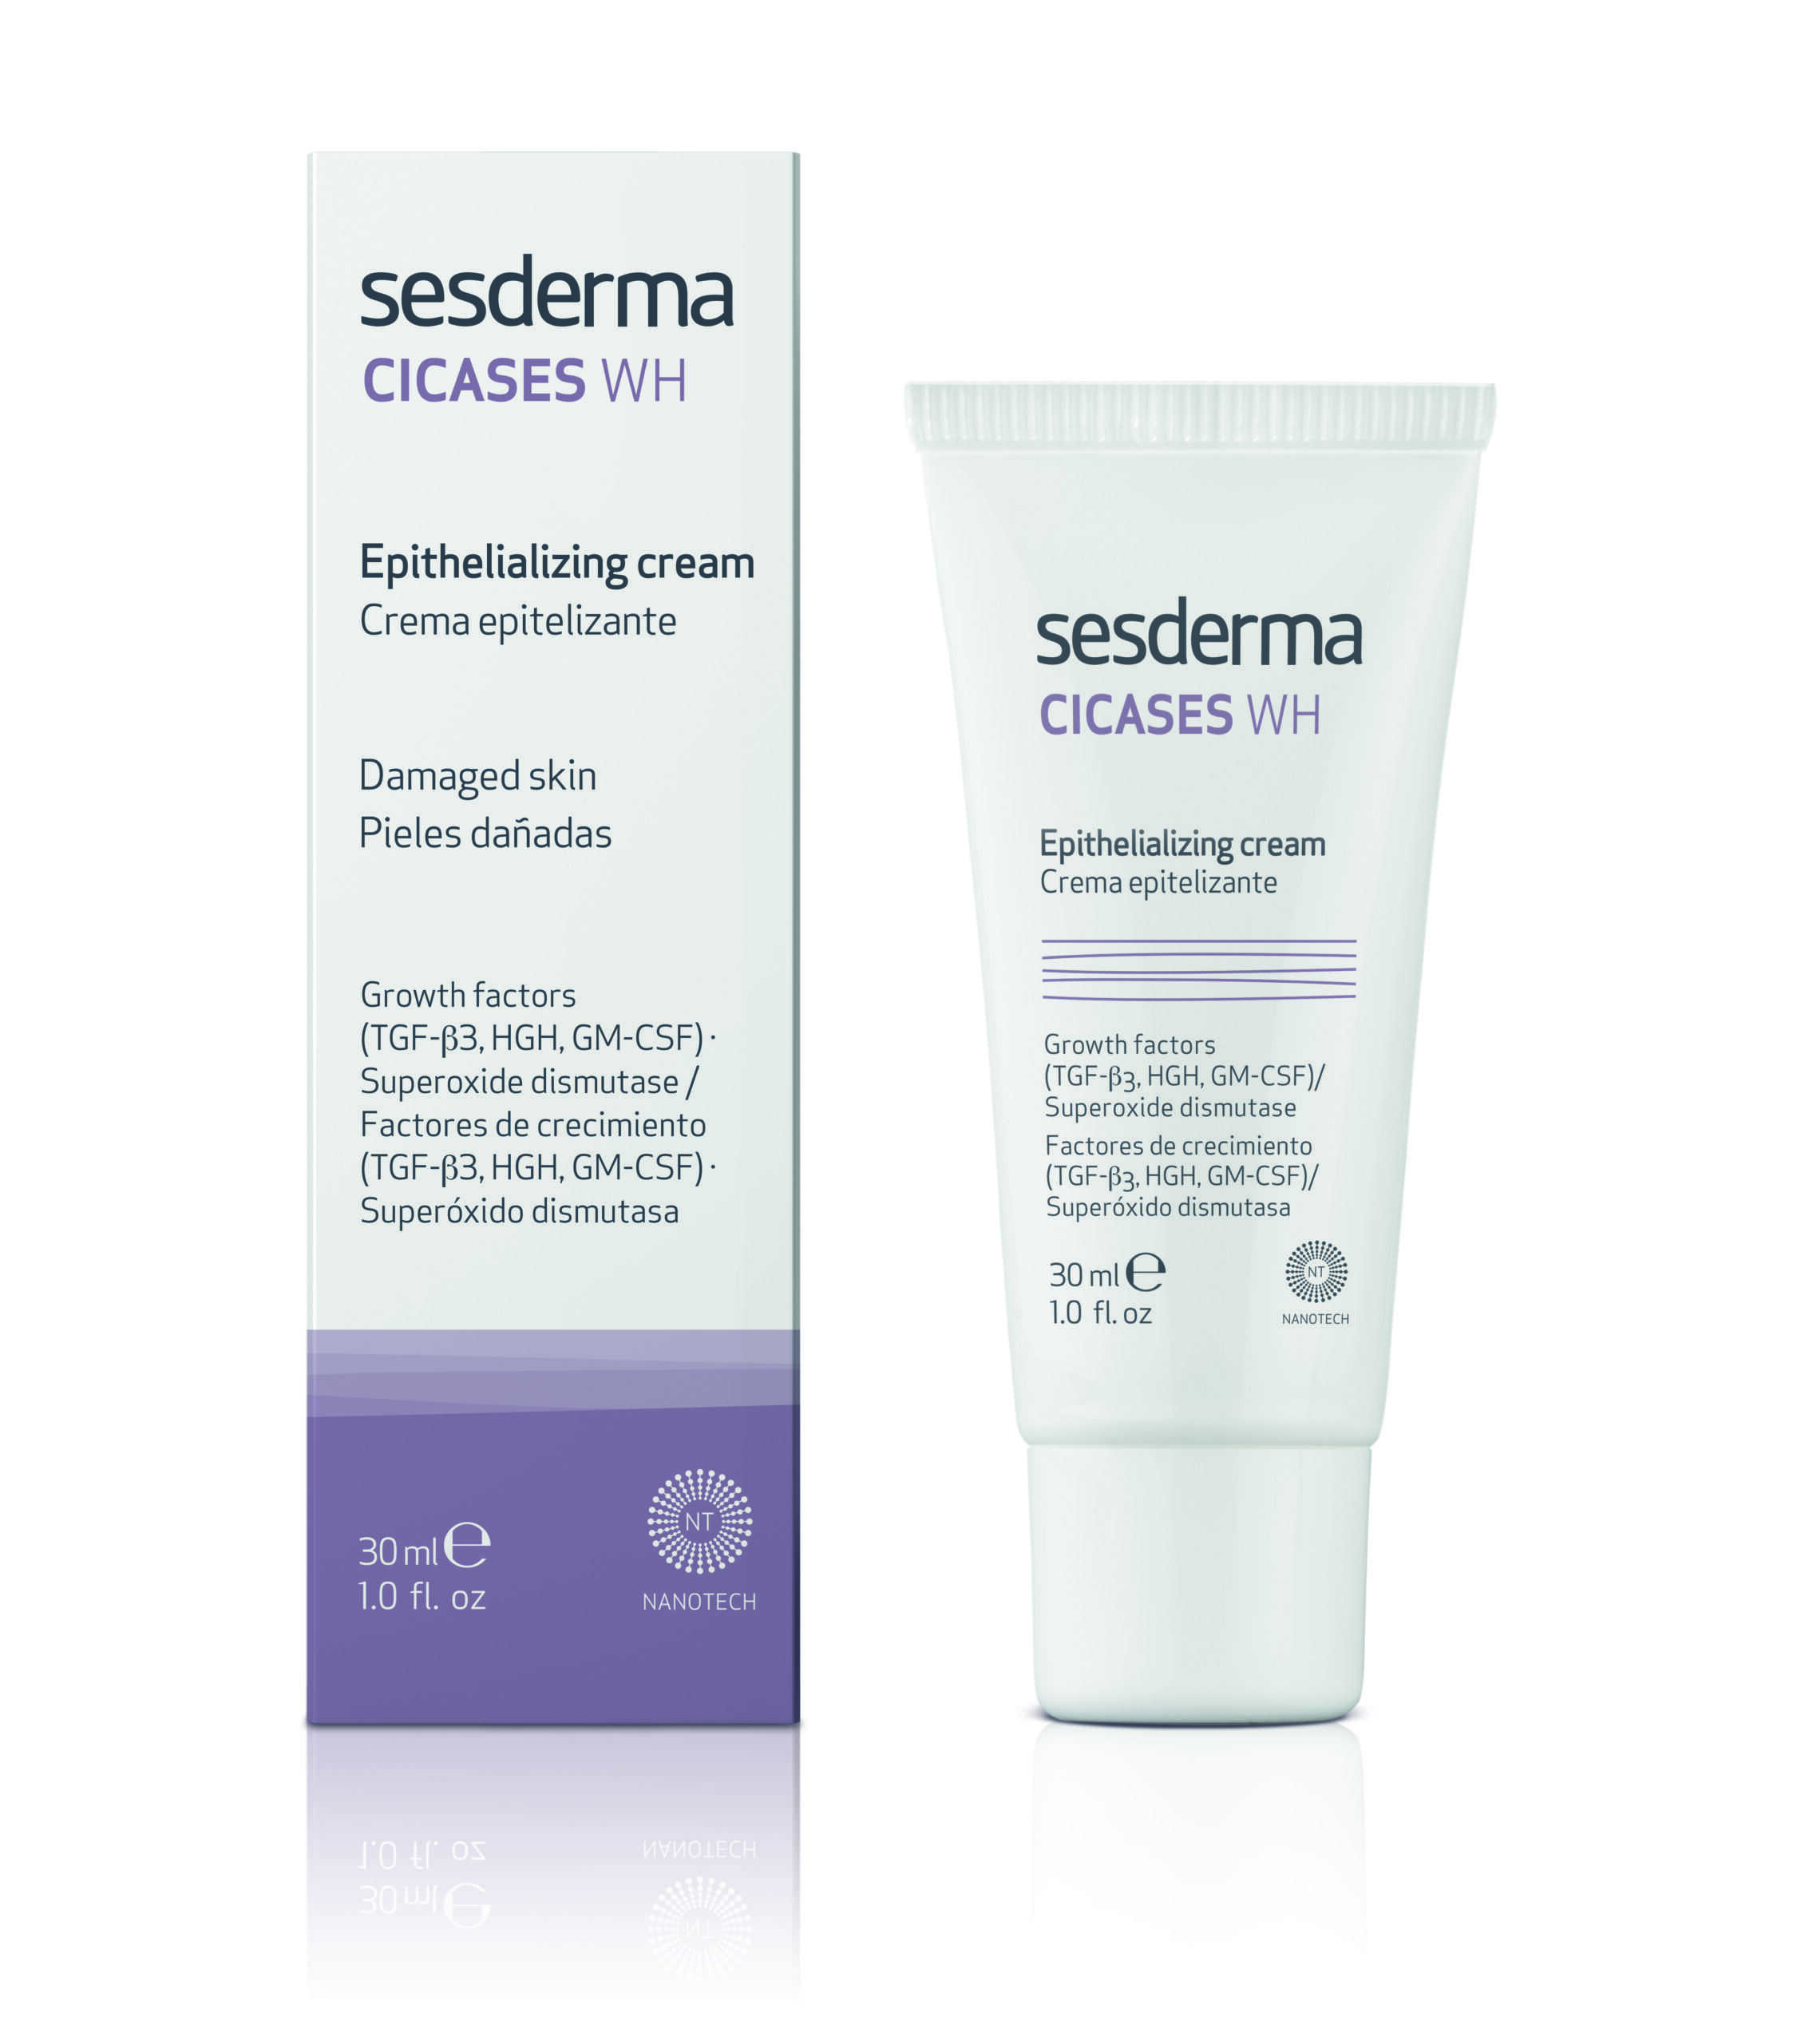 SESDERMA CICASES CICASES WH Epithelizing cream